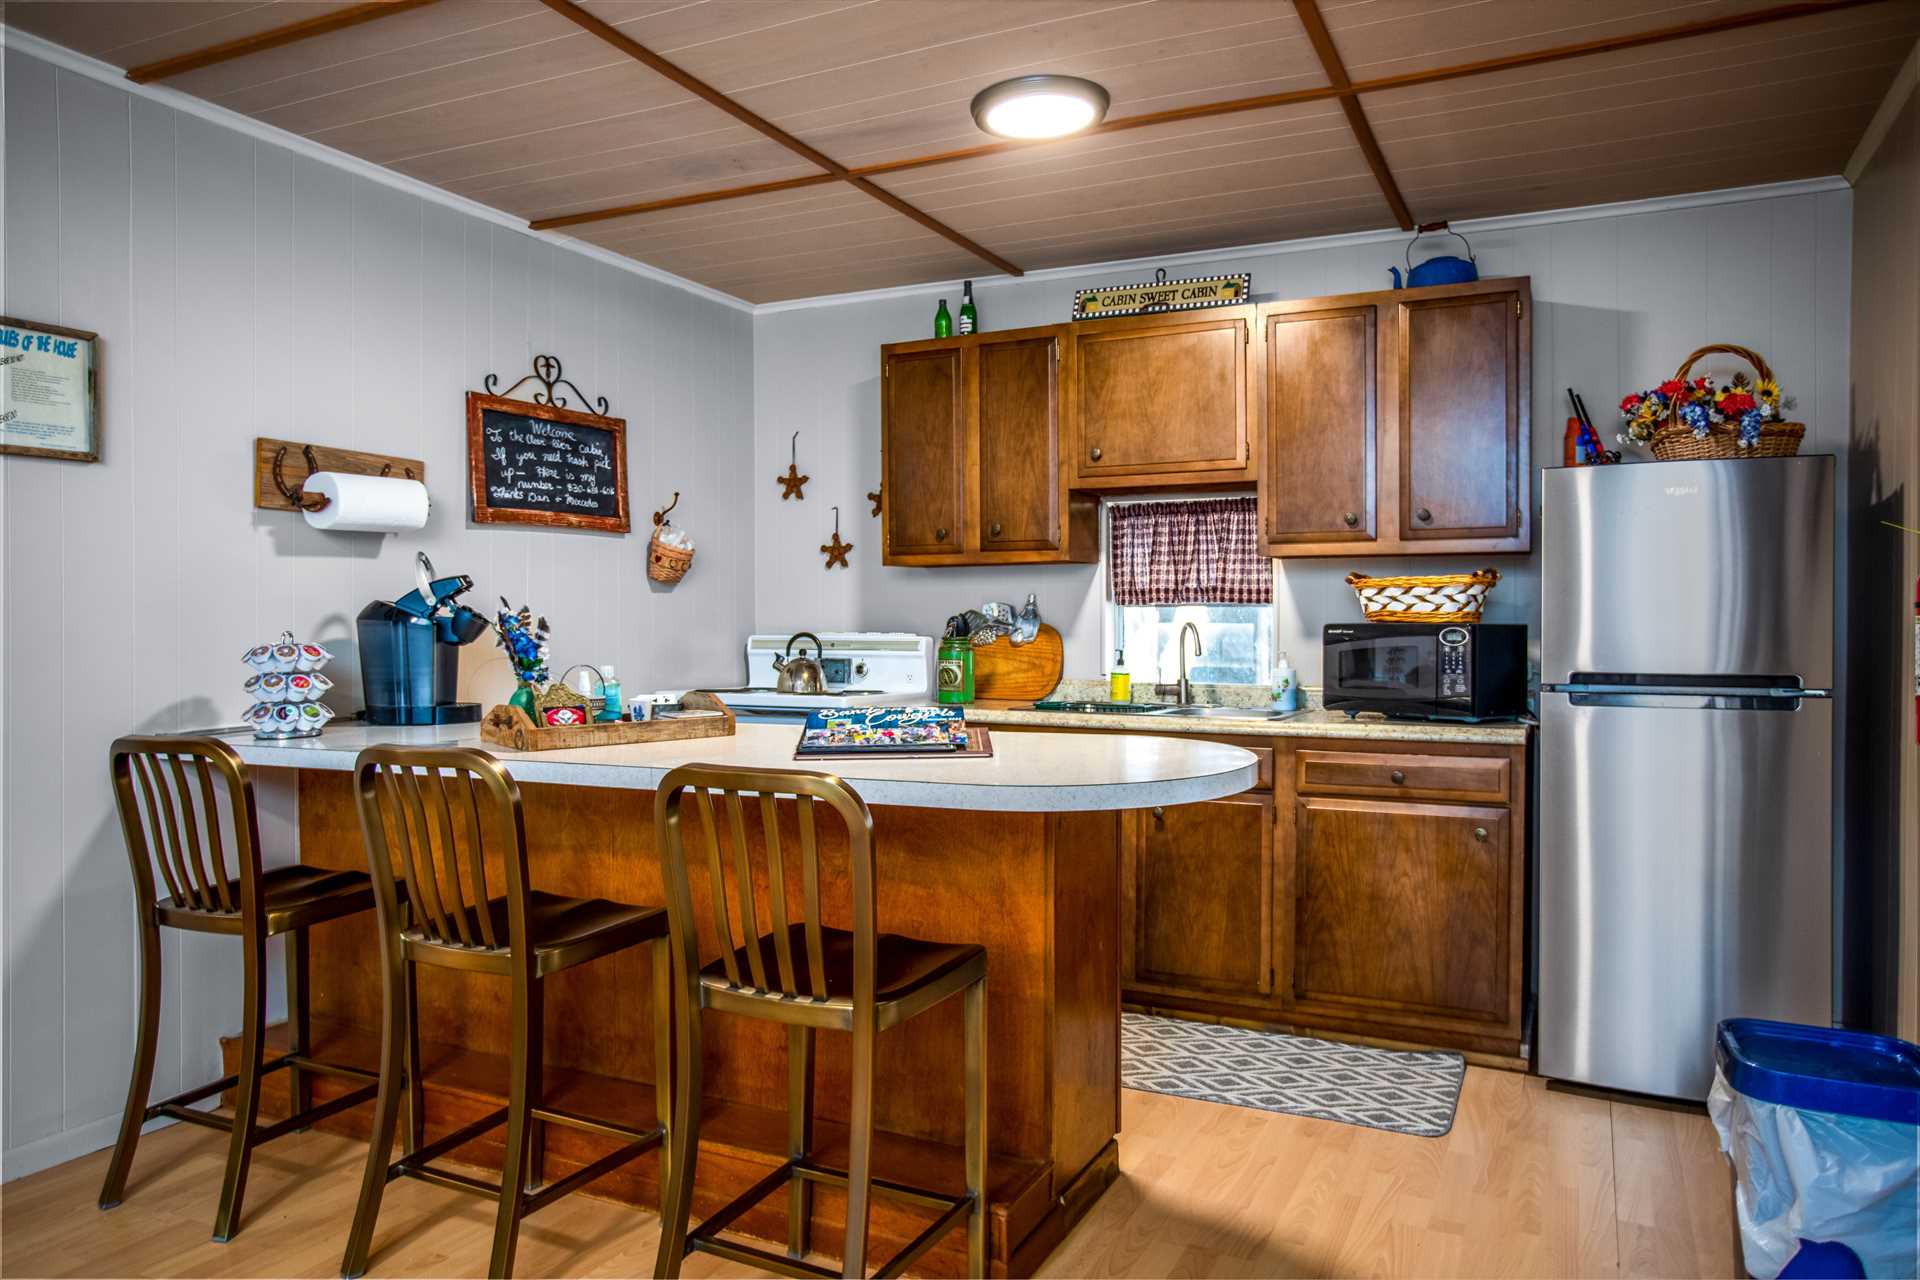                                                 Our recent guest Lindsey loved her stay here, including the kitchen! 